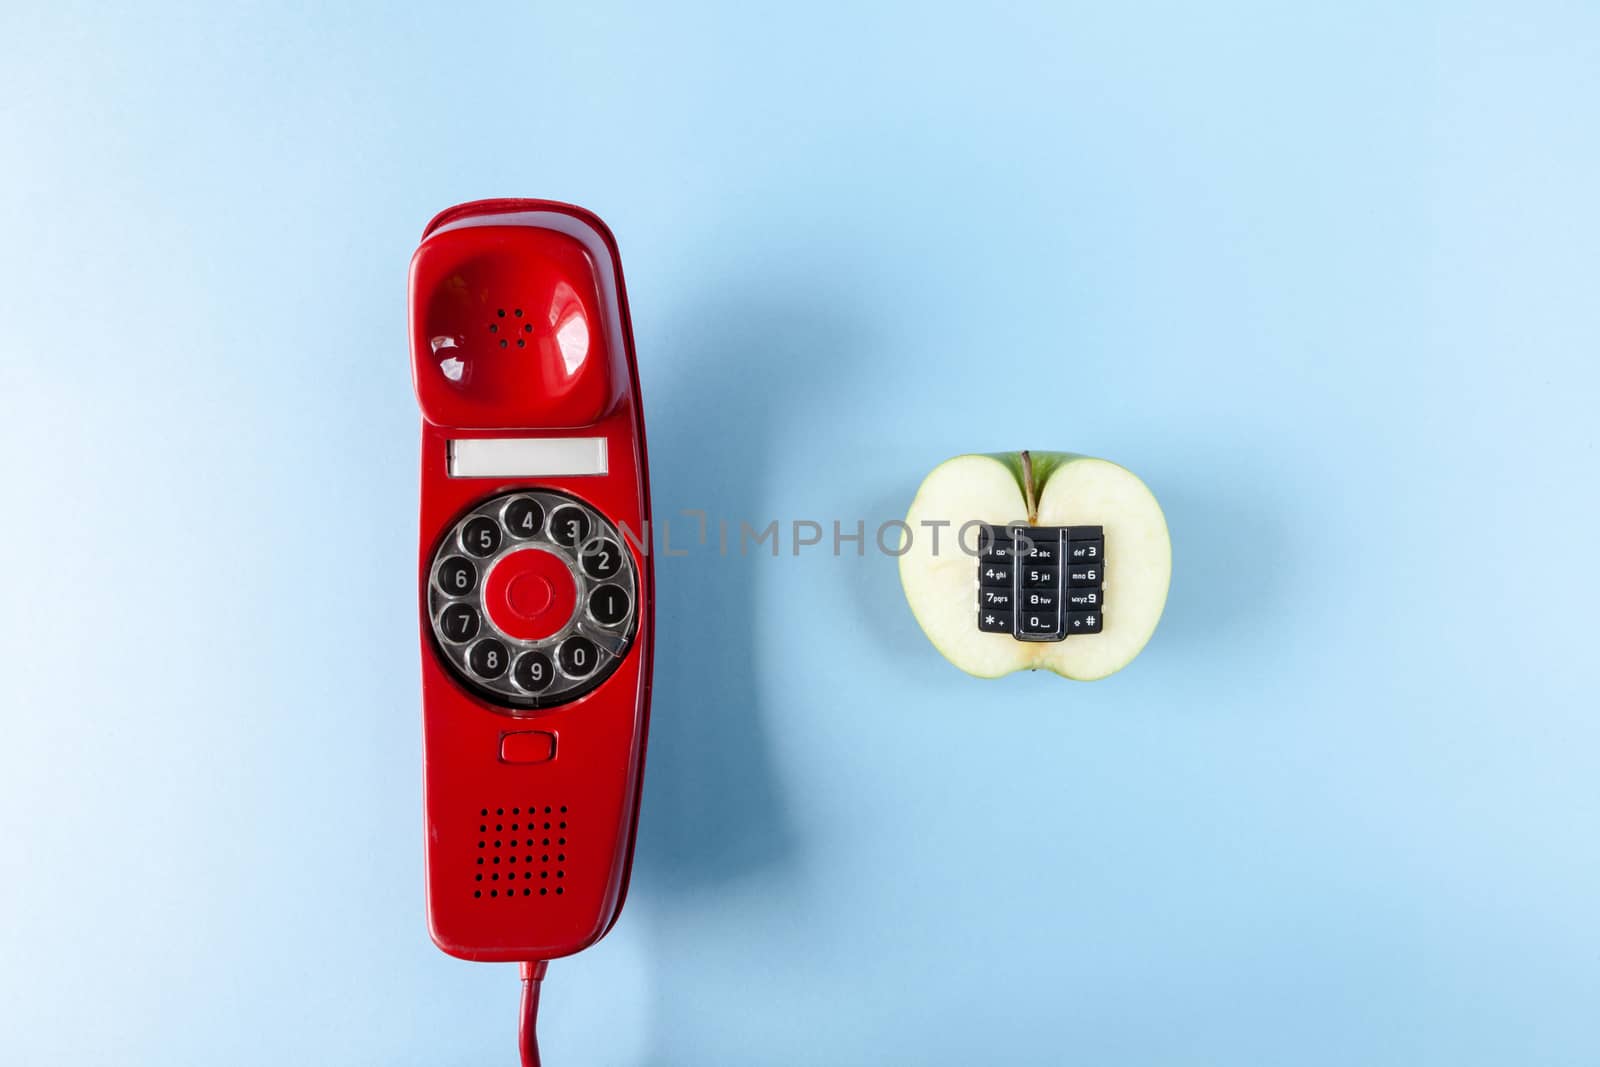 Alphanumeric apple and old red phone on a blue background